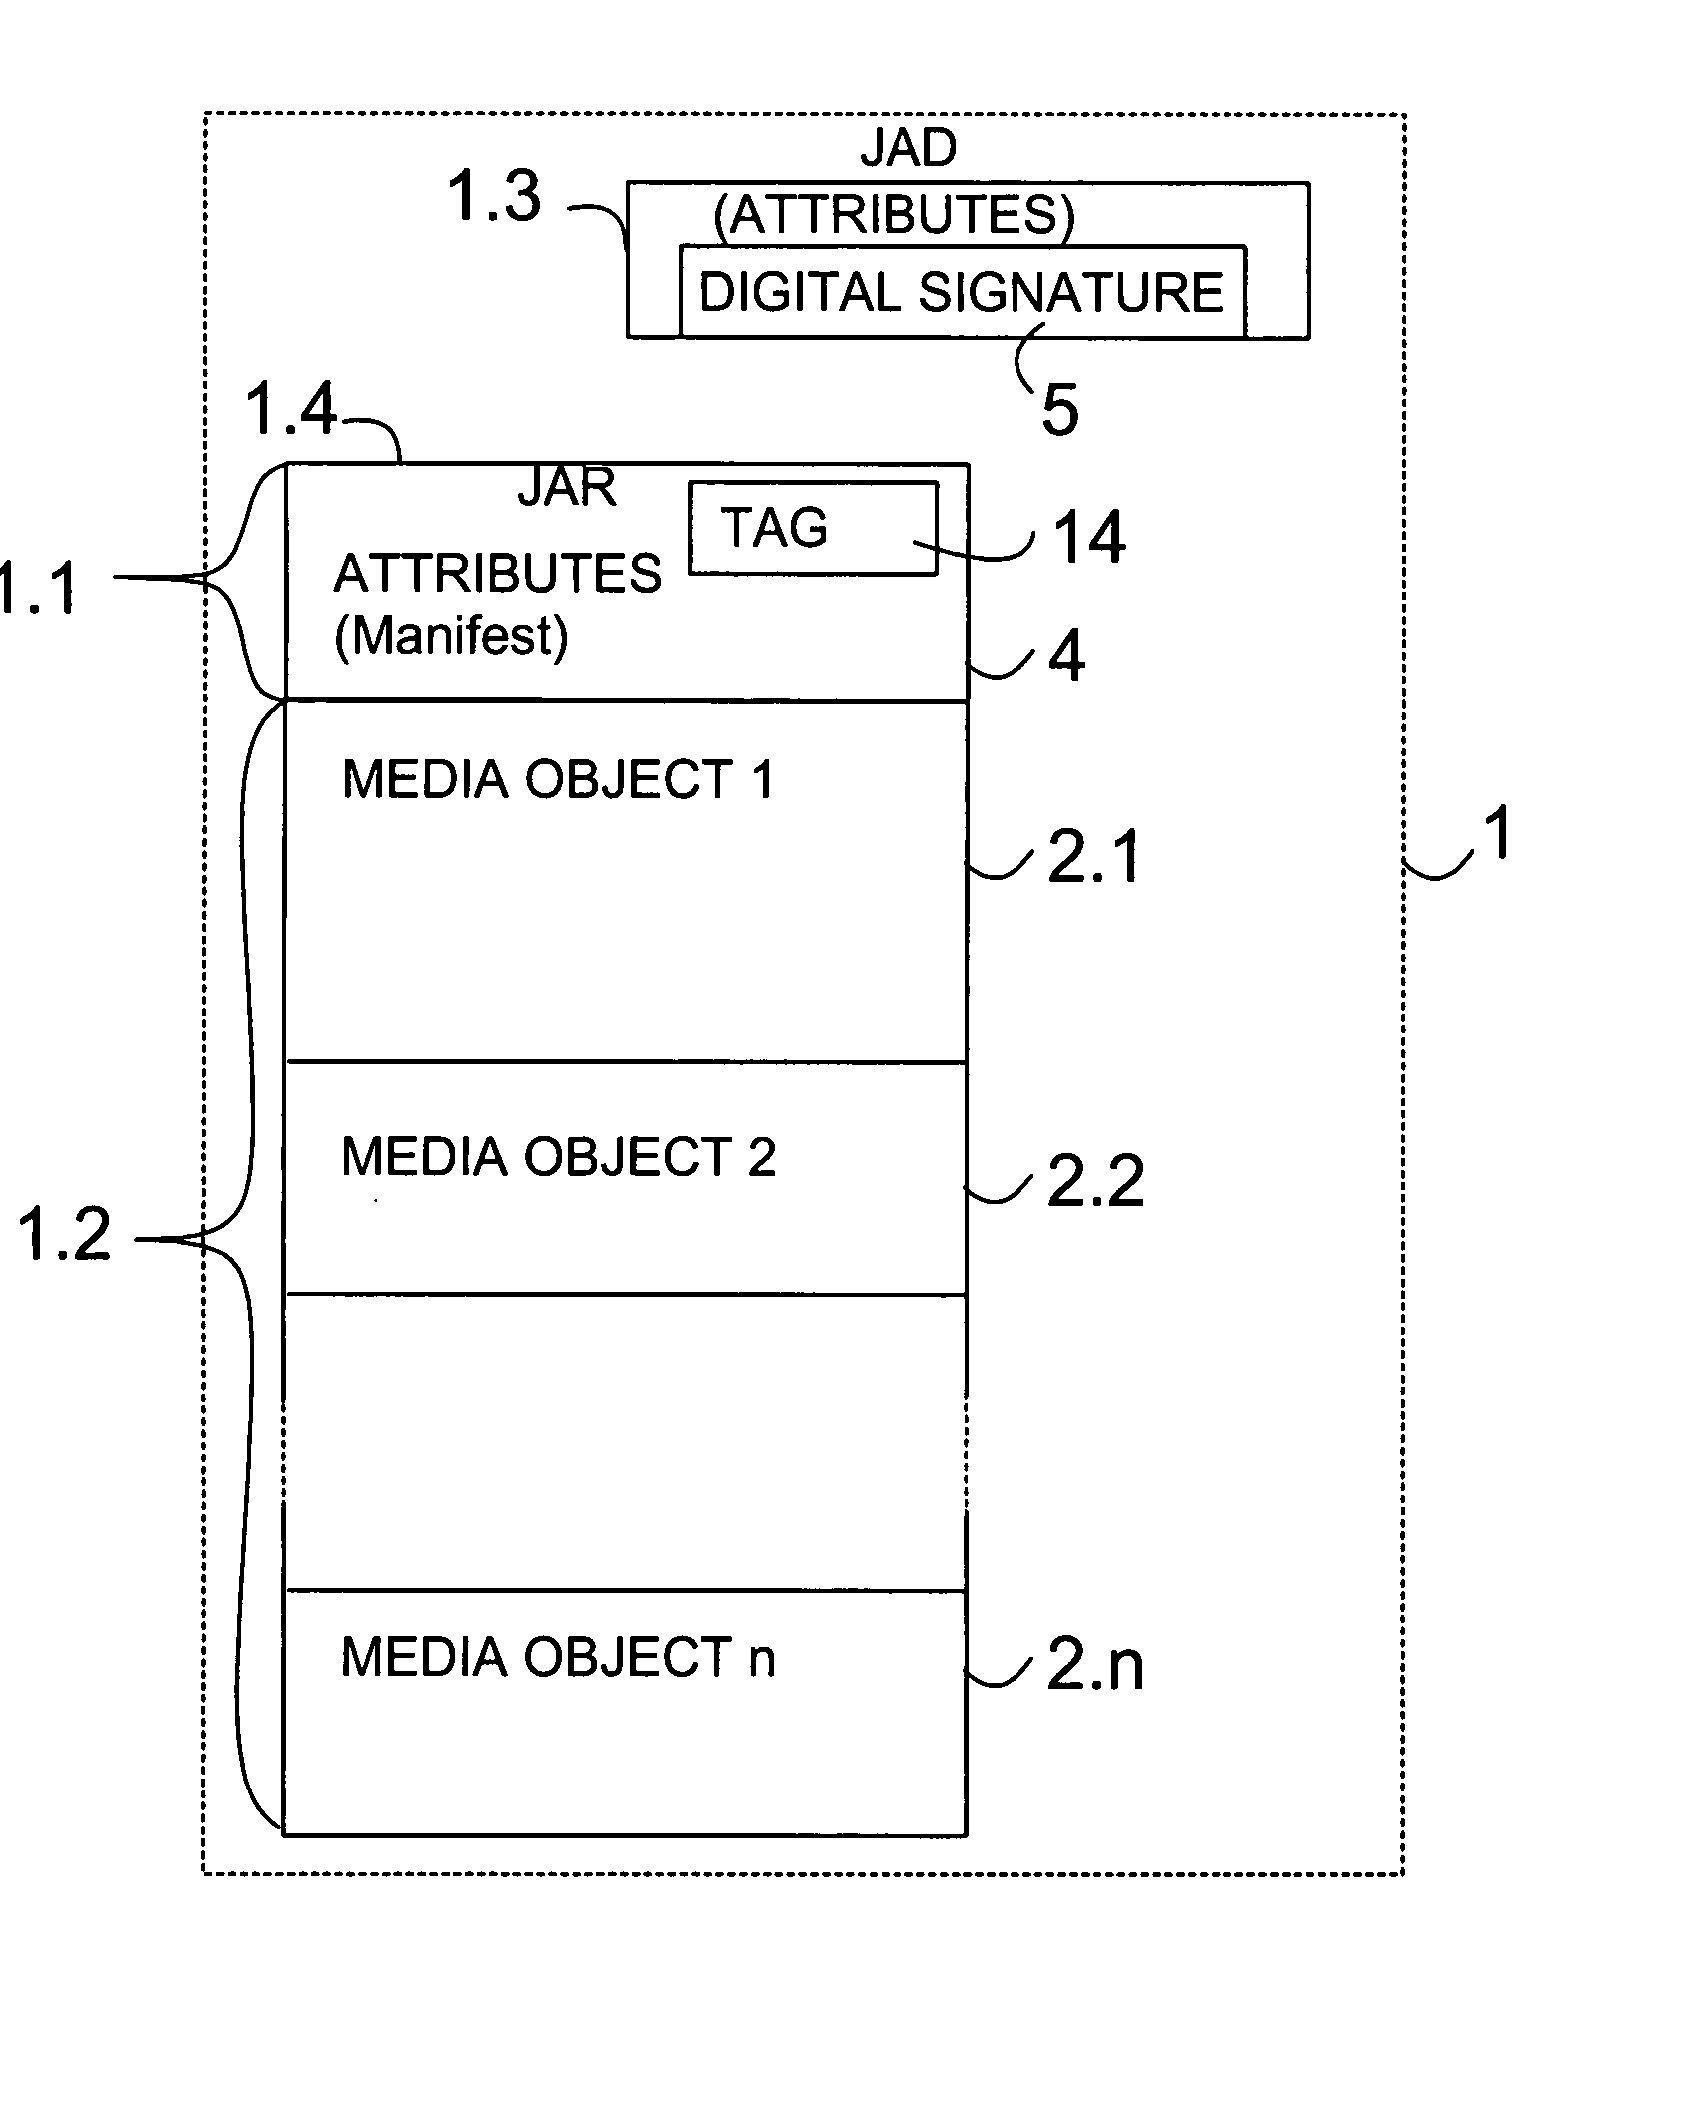 Distribution of media objects